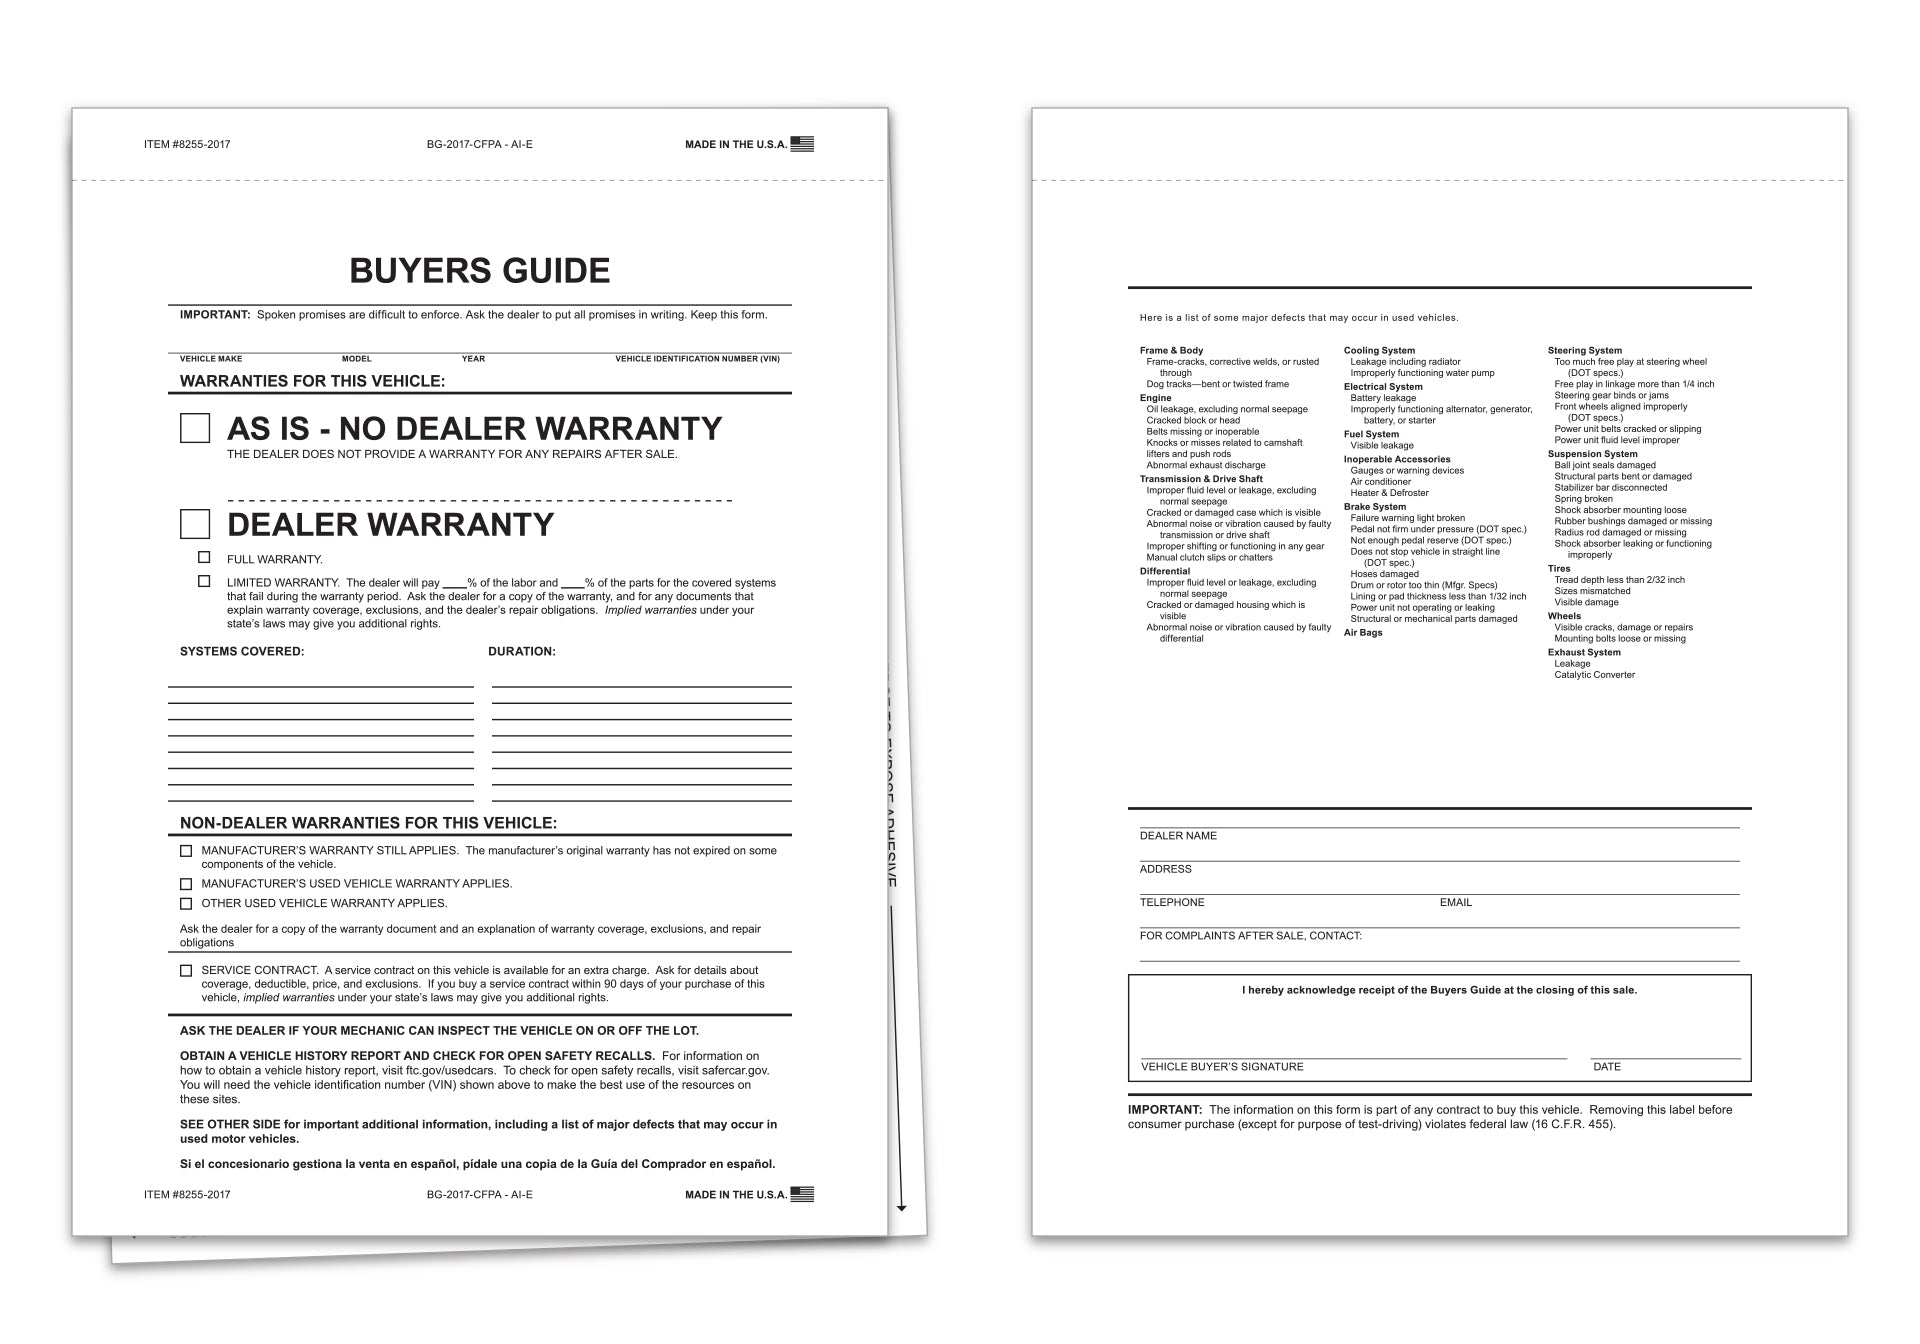 2 Part "As Is" Buyers Guide. Used for selling cars. www.flywheelnw.com